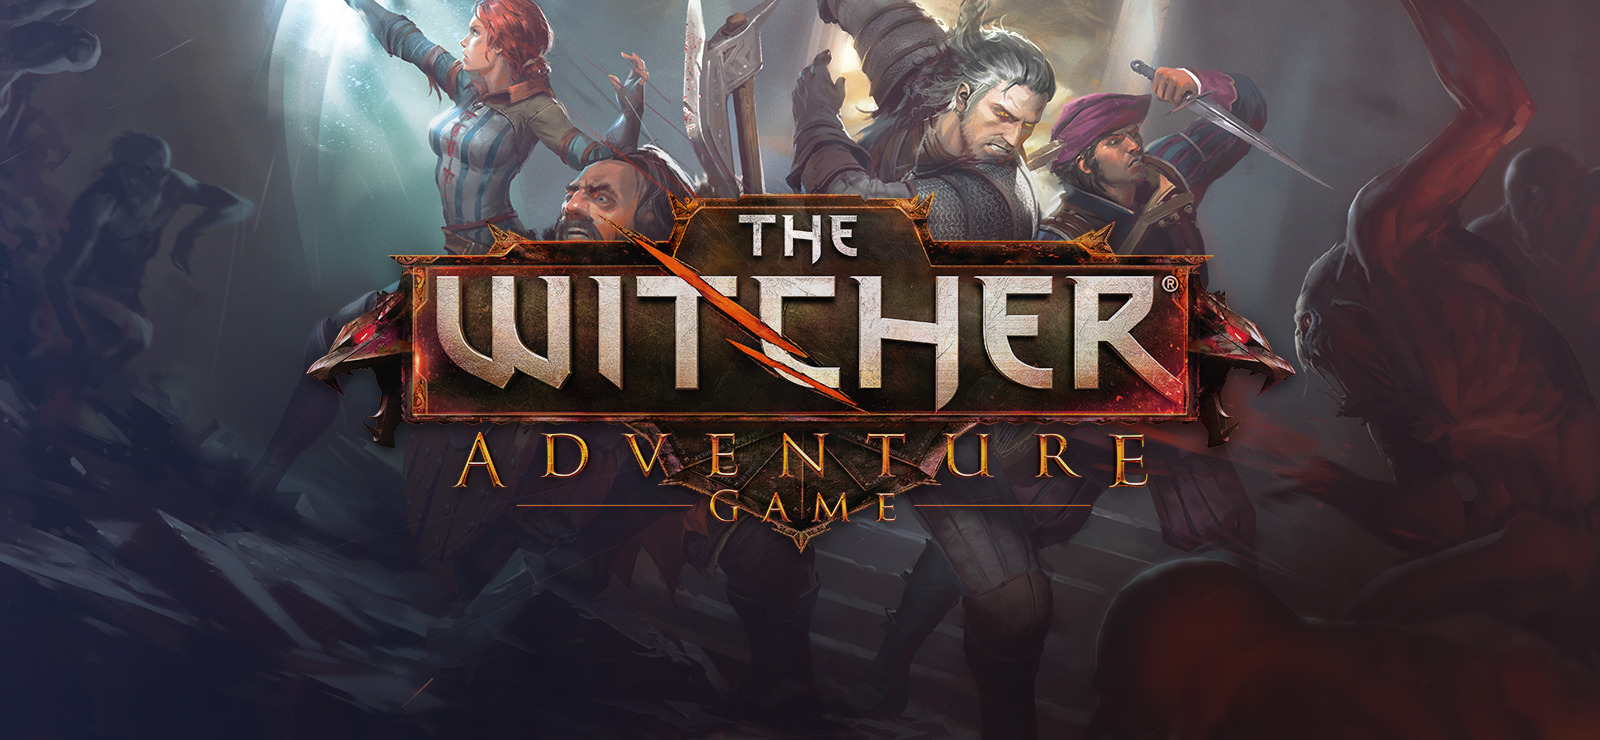 85% The Witcher Adventure Game on